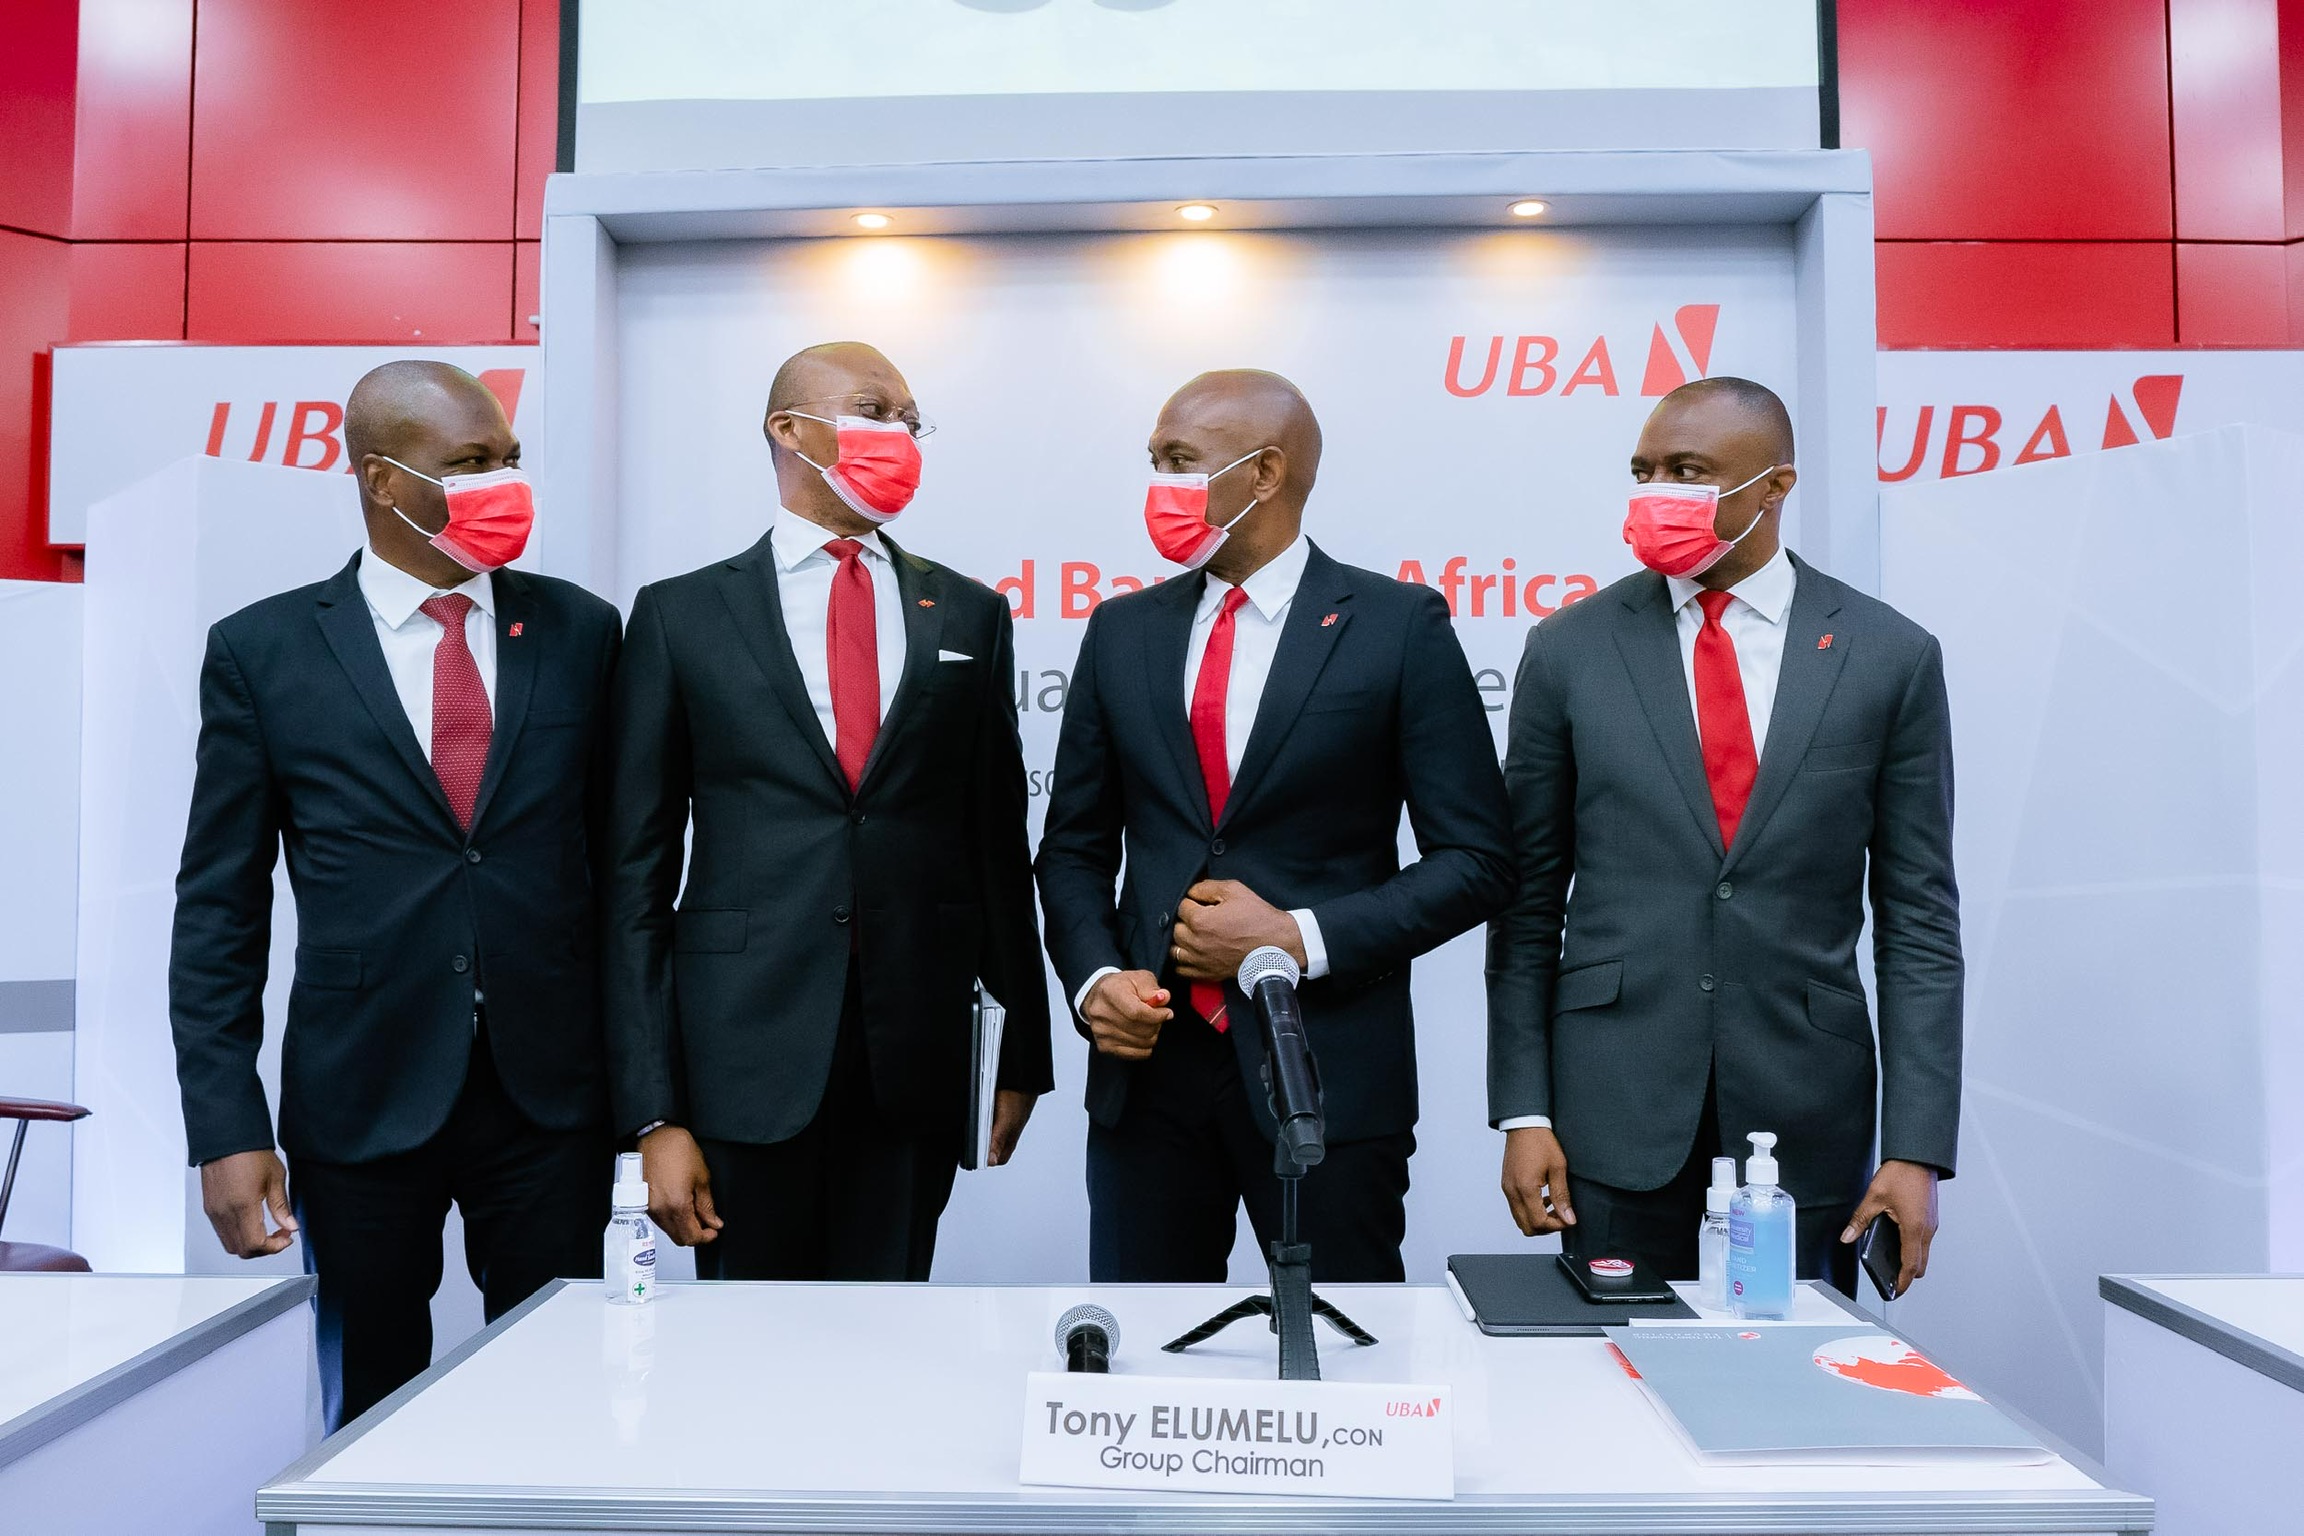 59th-annual-general-meeting-of-uba-plc-uba-is-well-positioned-to-benefit-from-recovery-trends